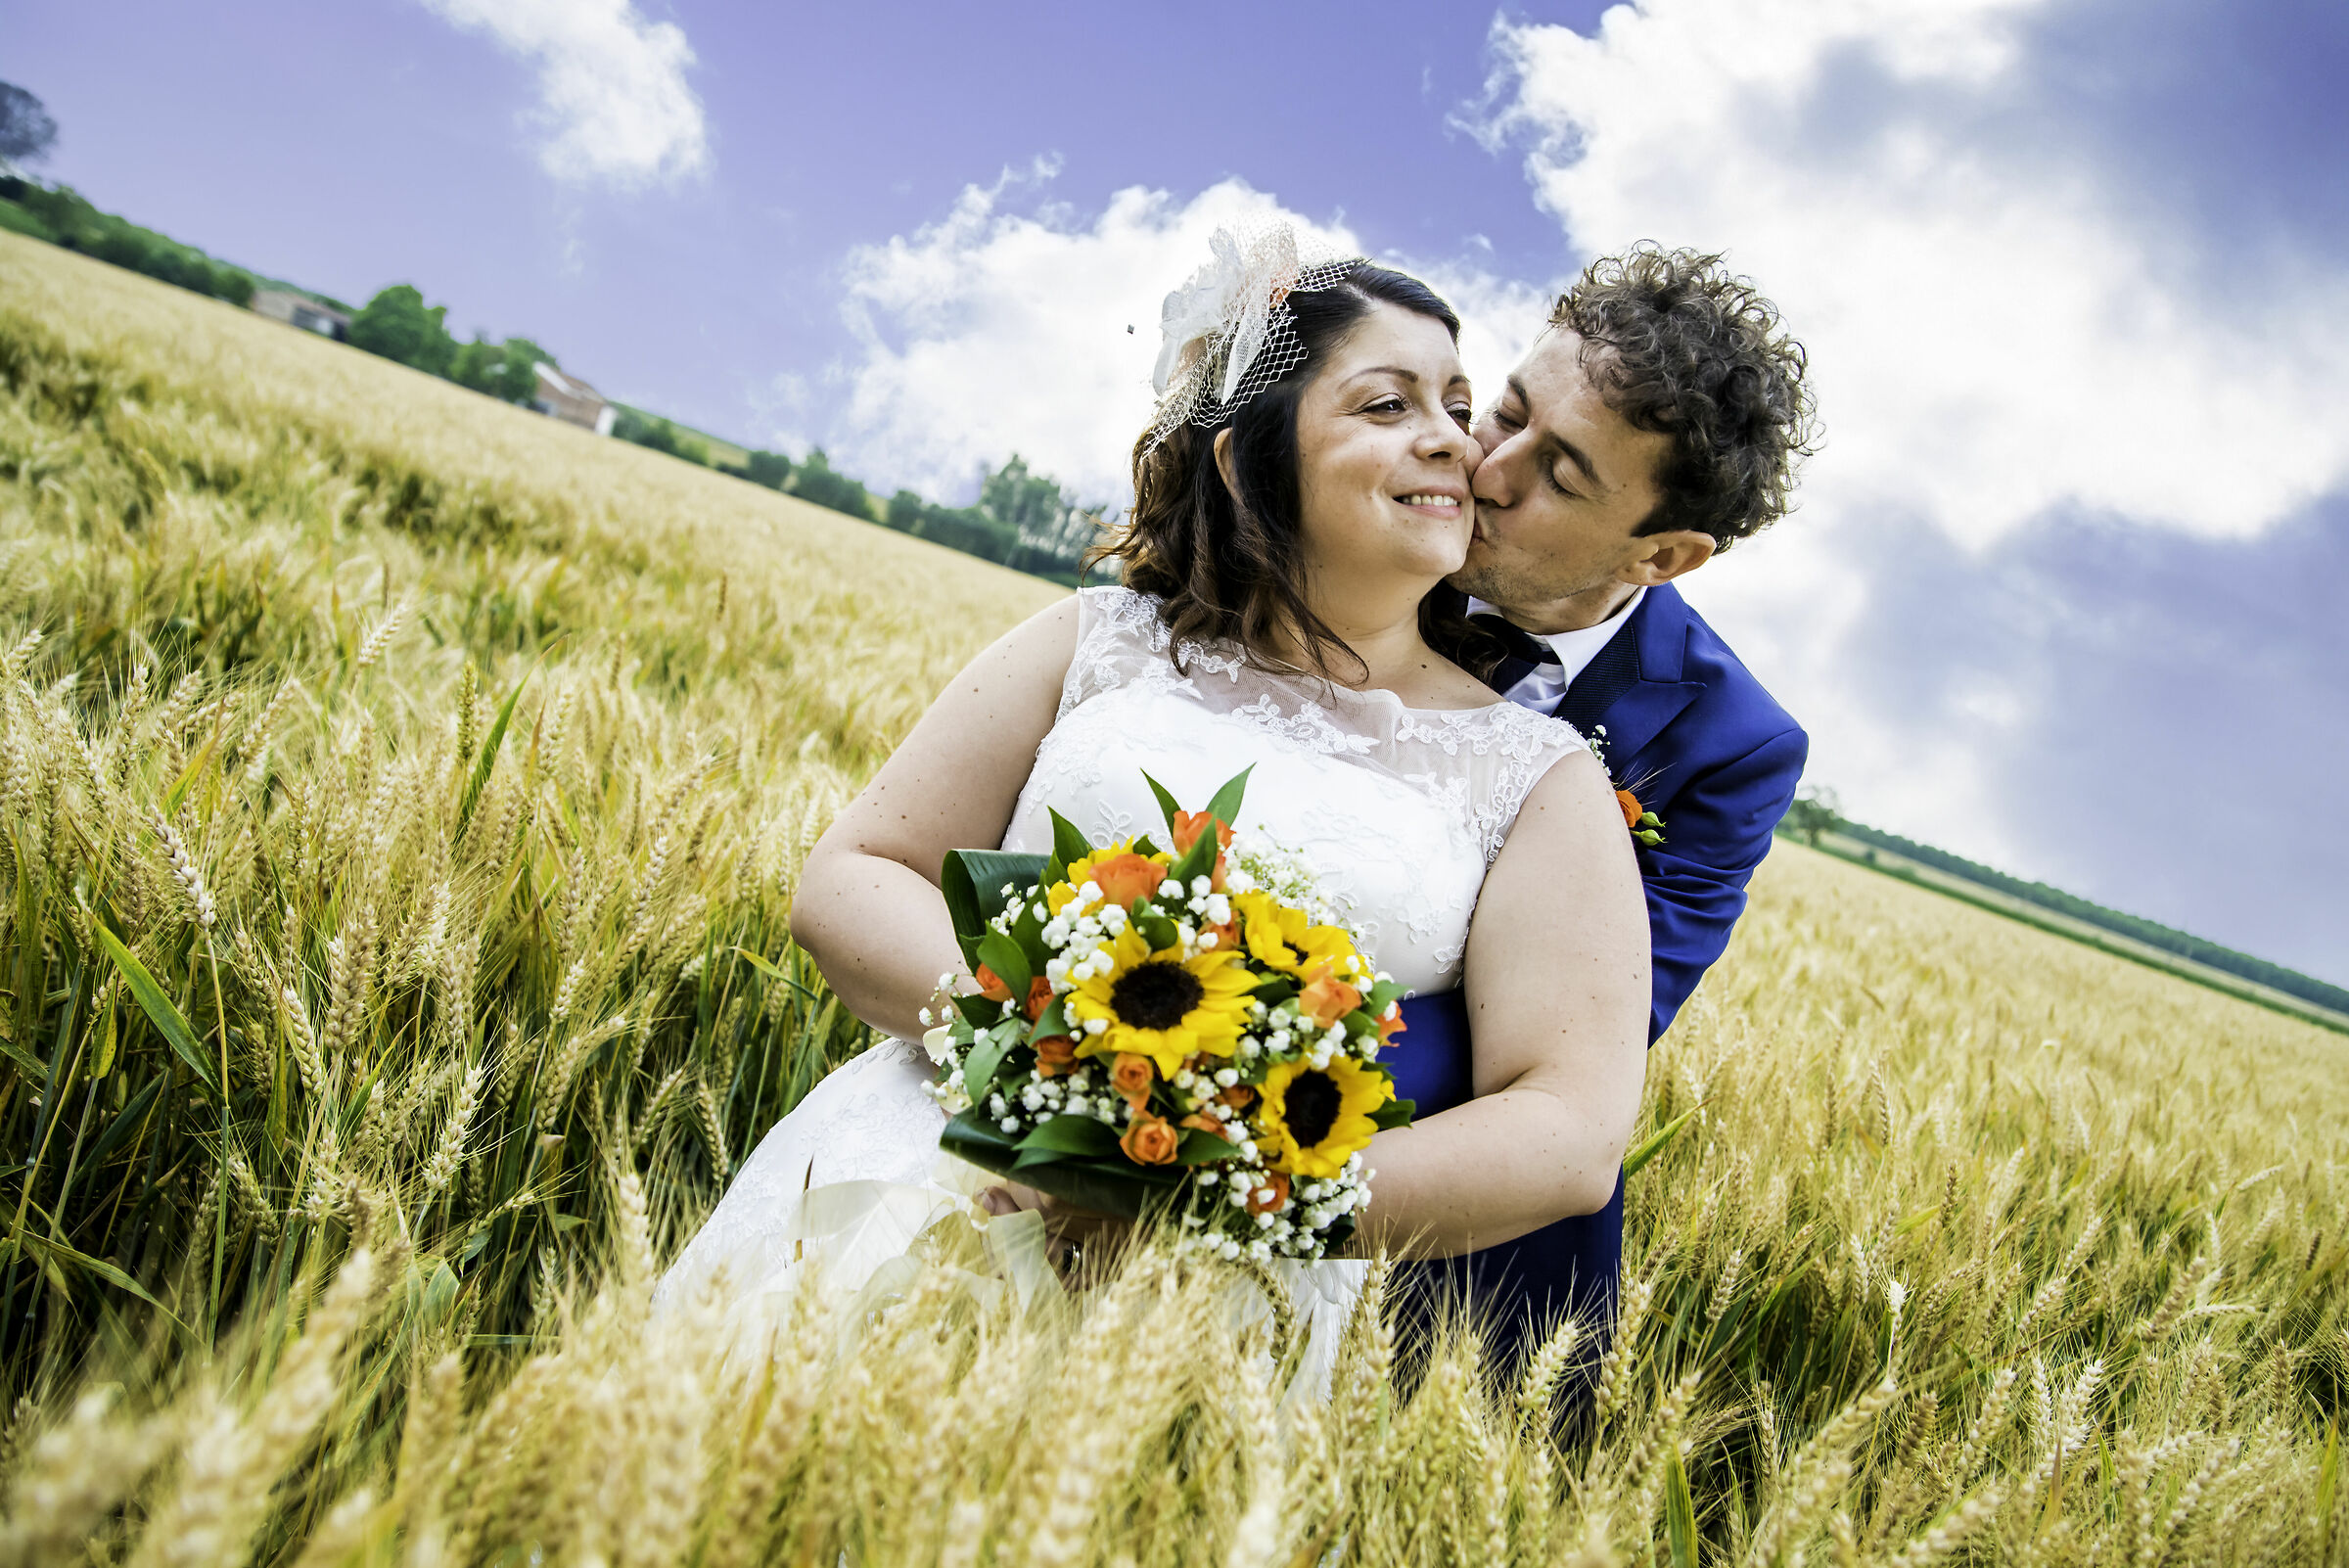 Newlyweds in the Wheat...